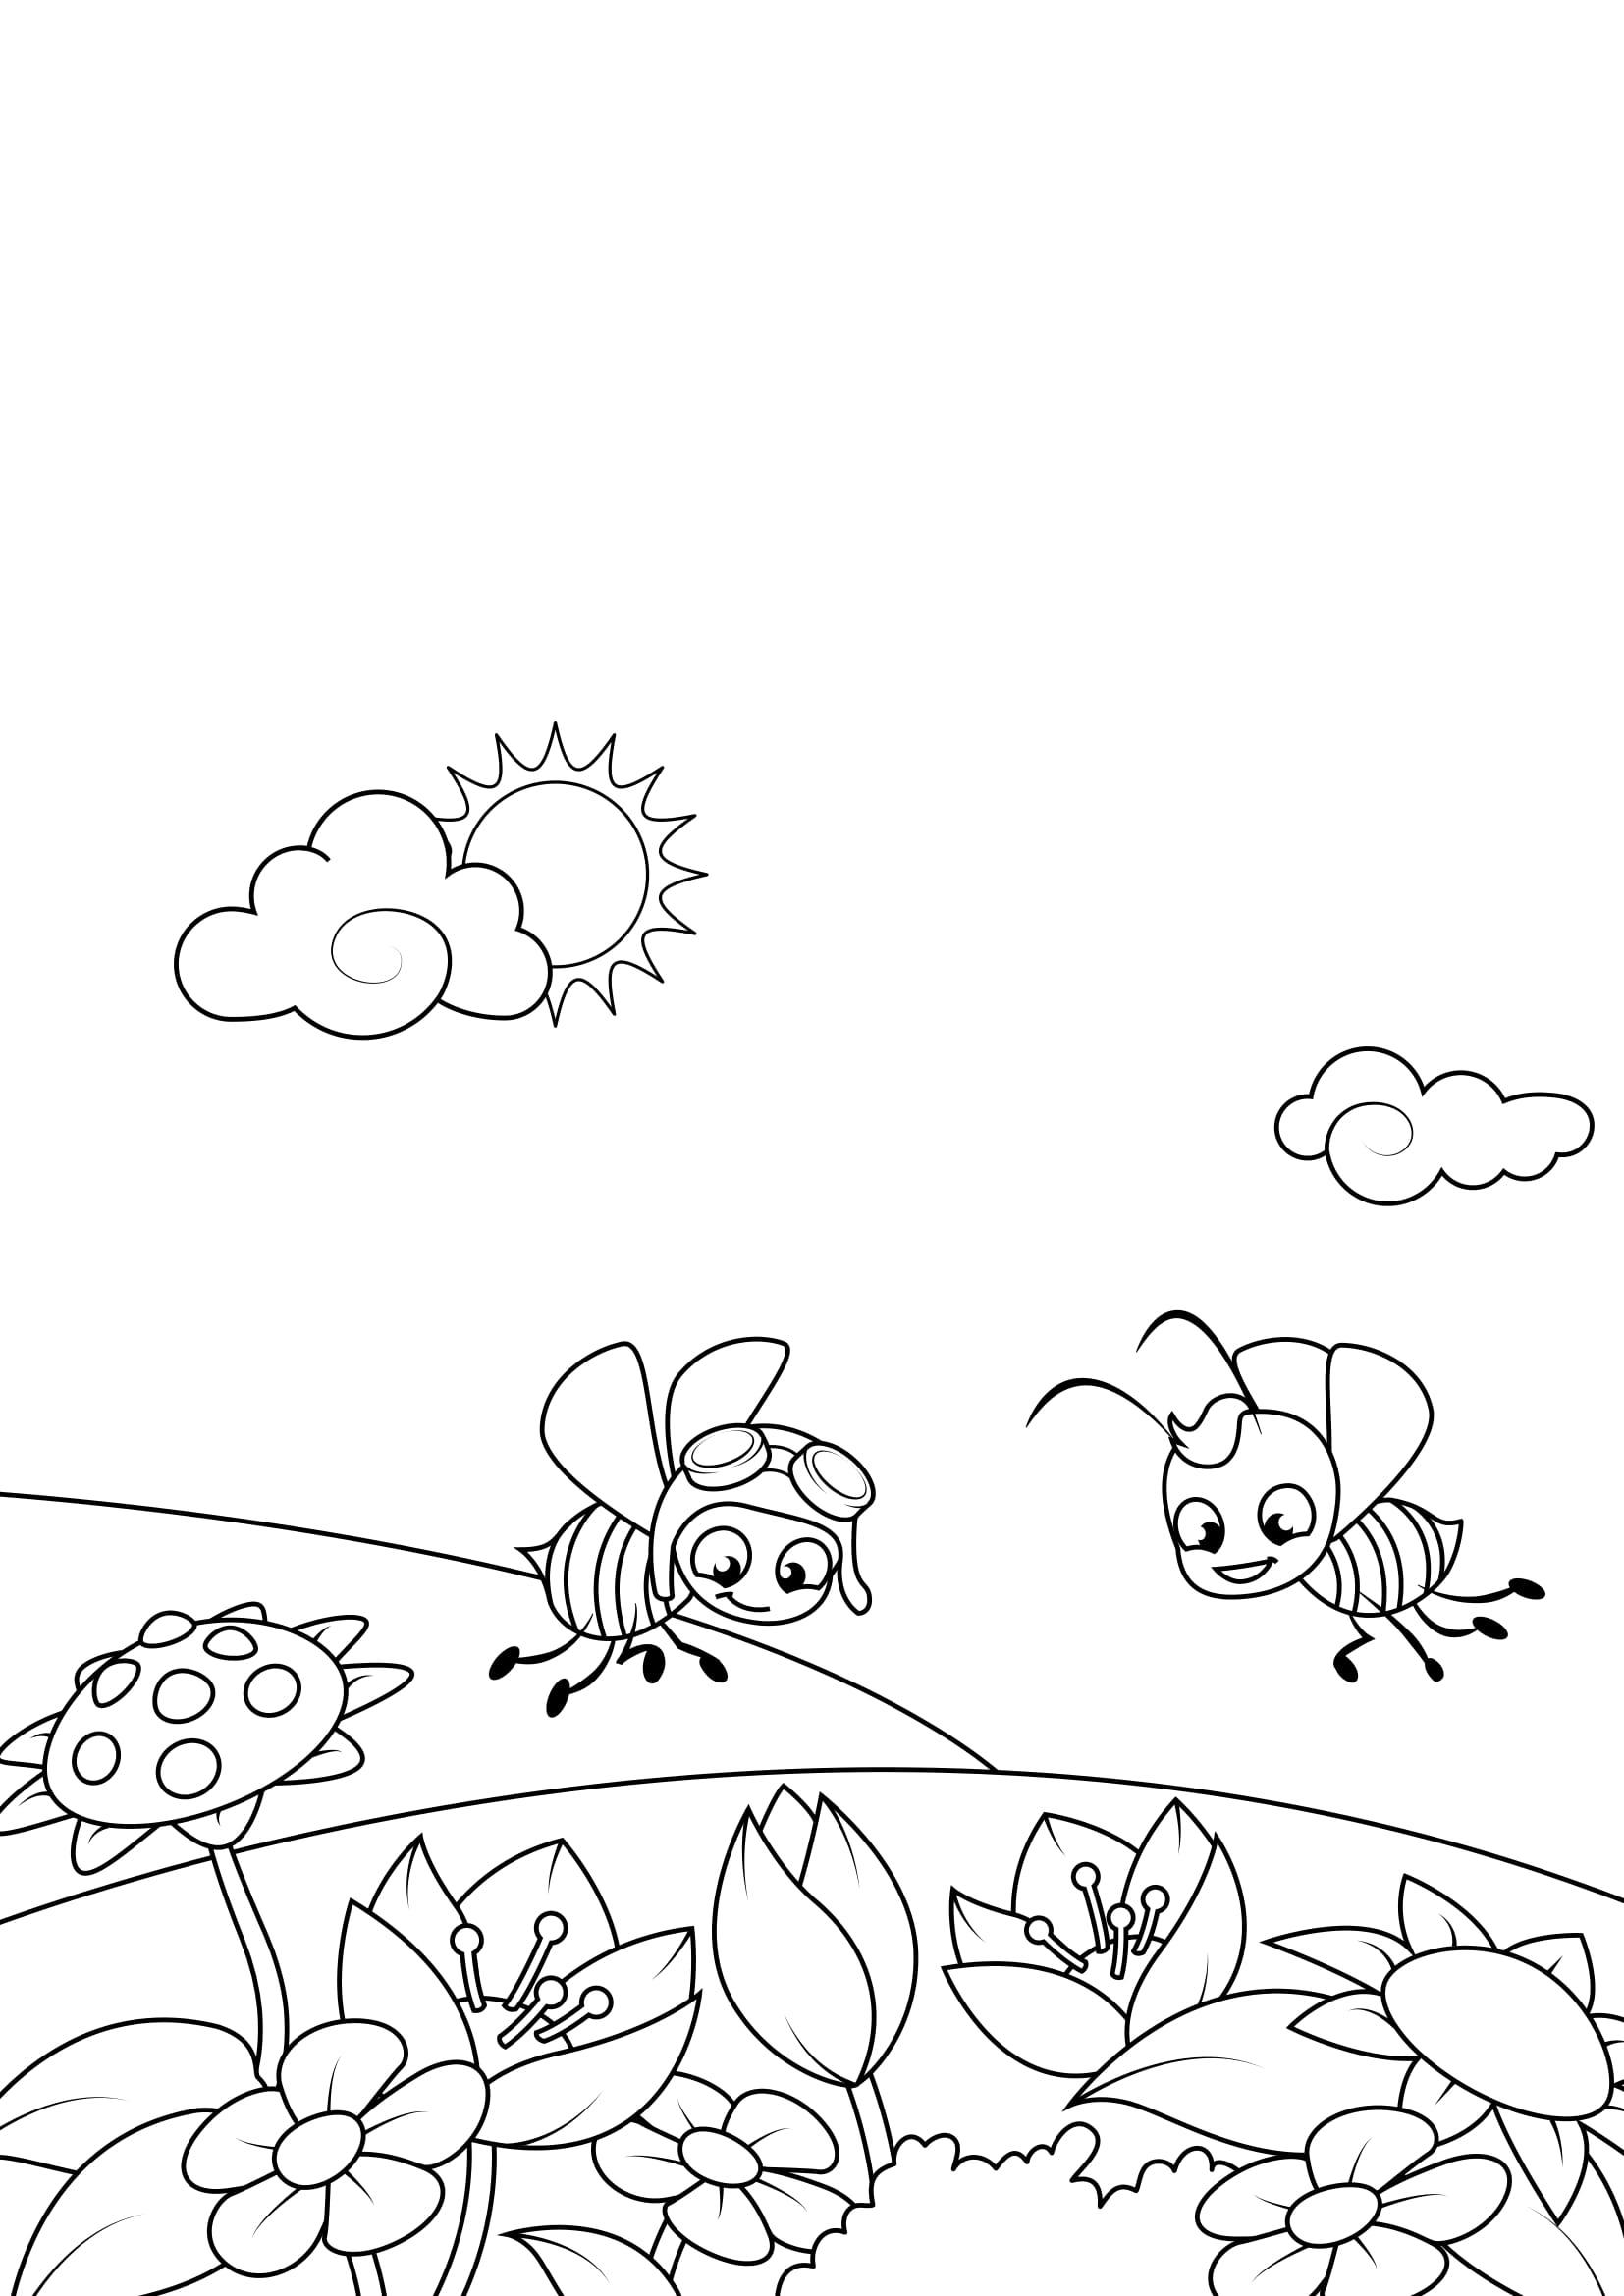 Coloring page spring, bees in the garden